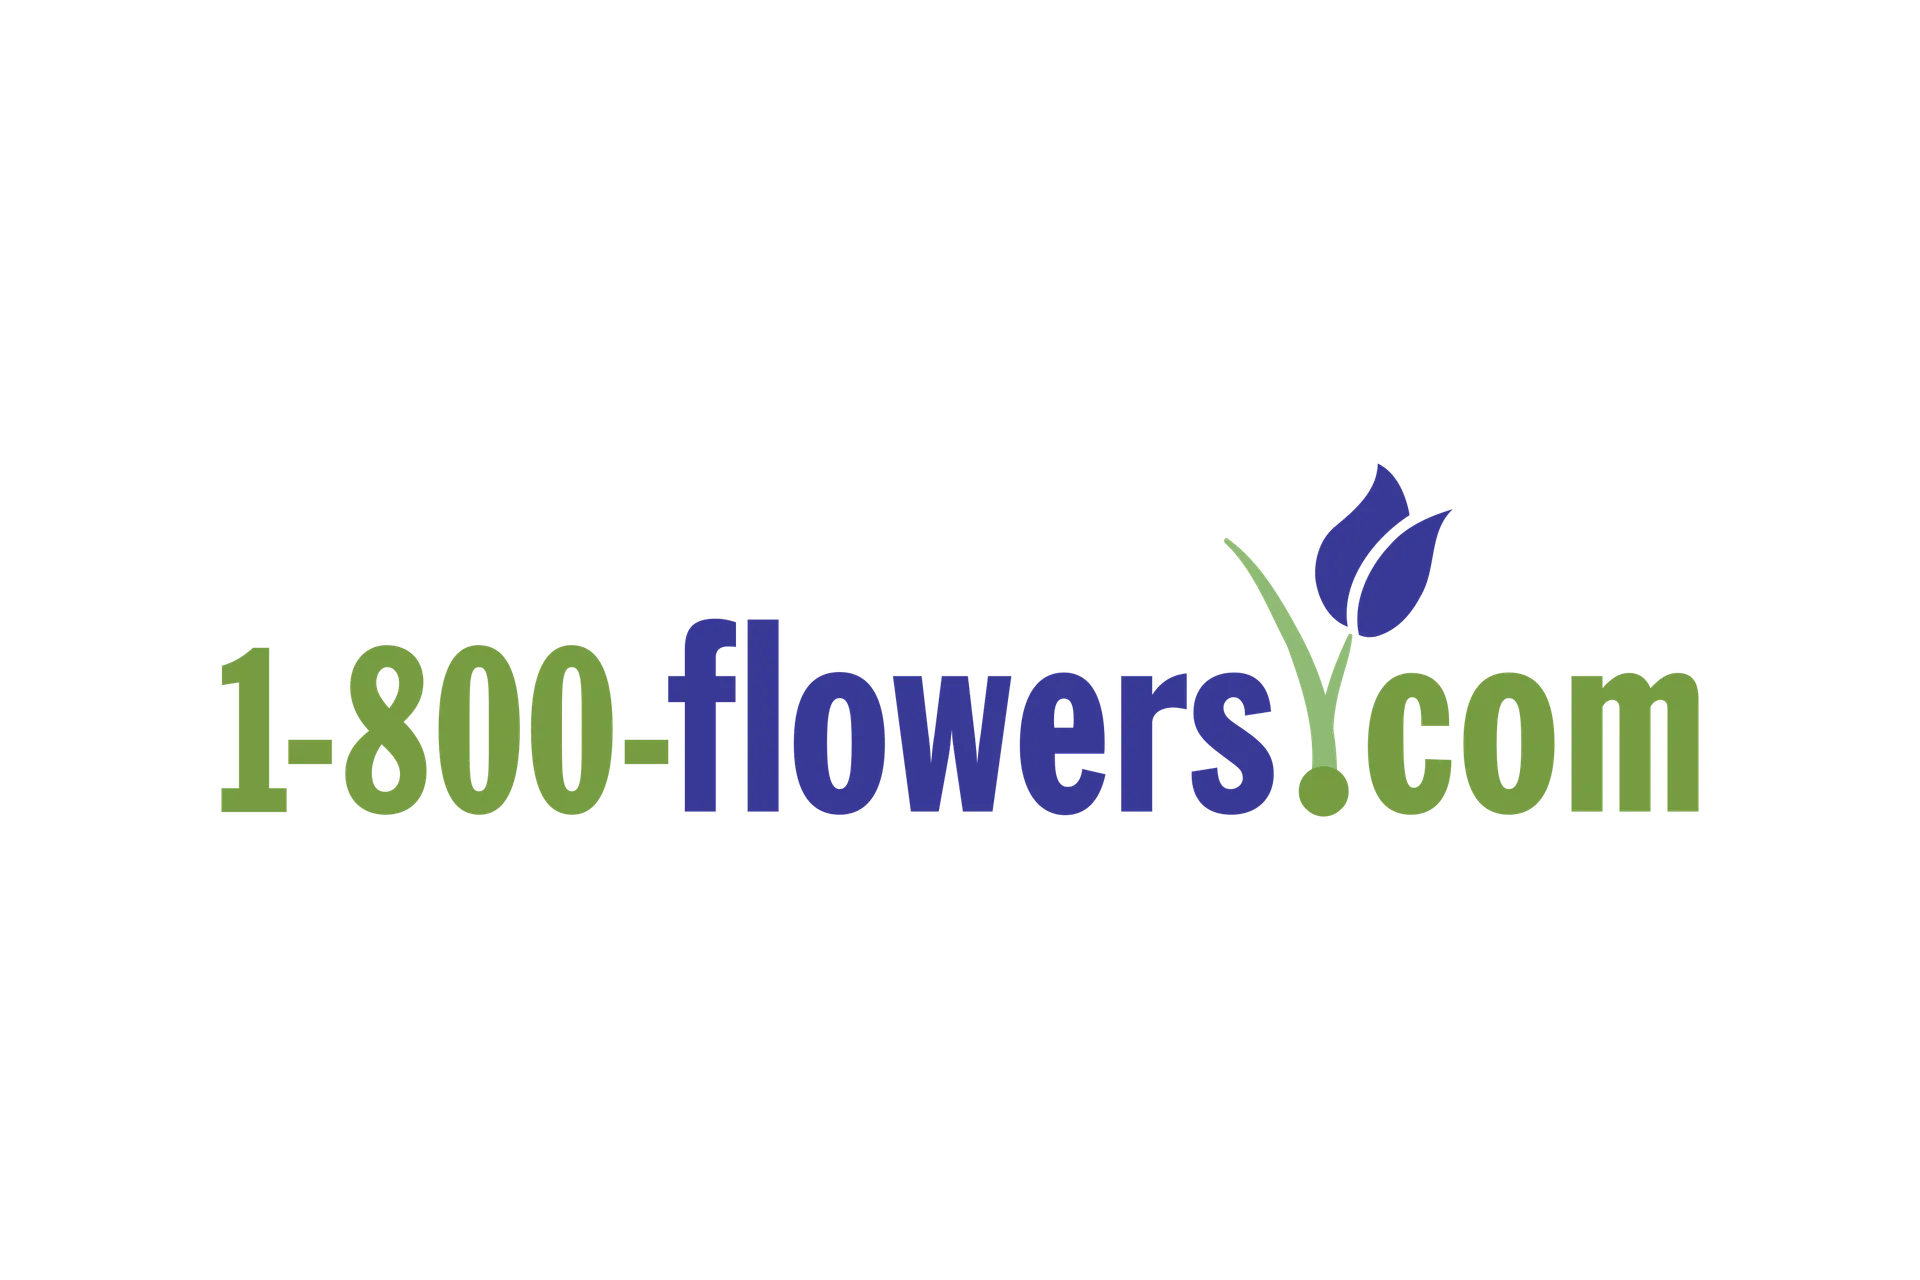 1-800 FLOWERS logo current weekly ad